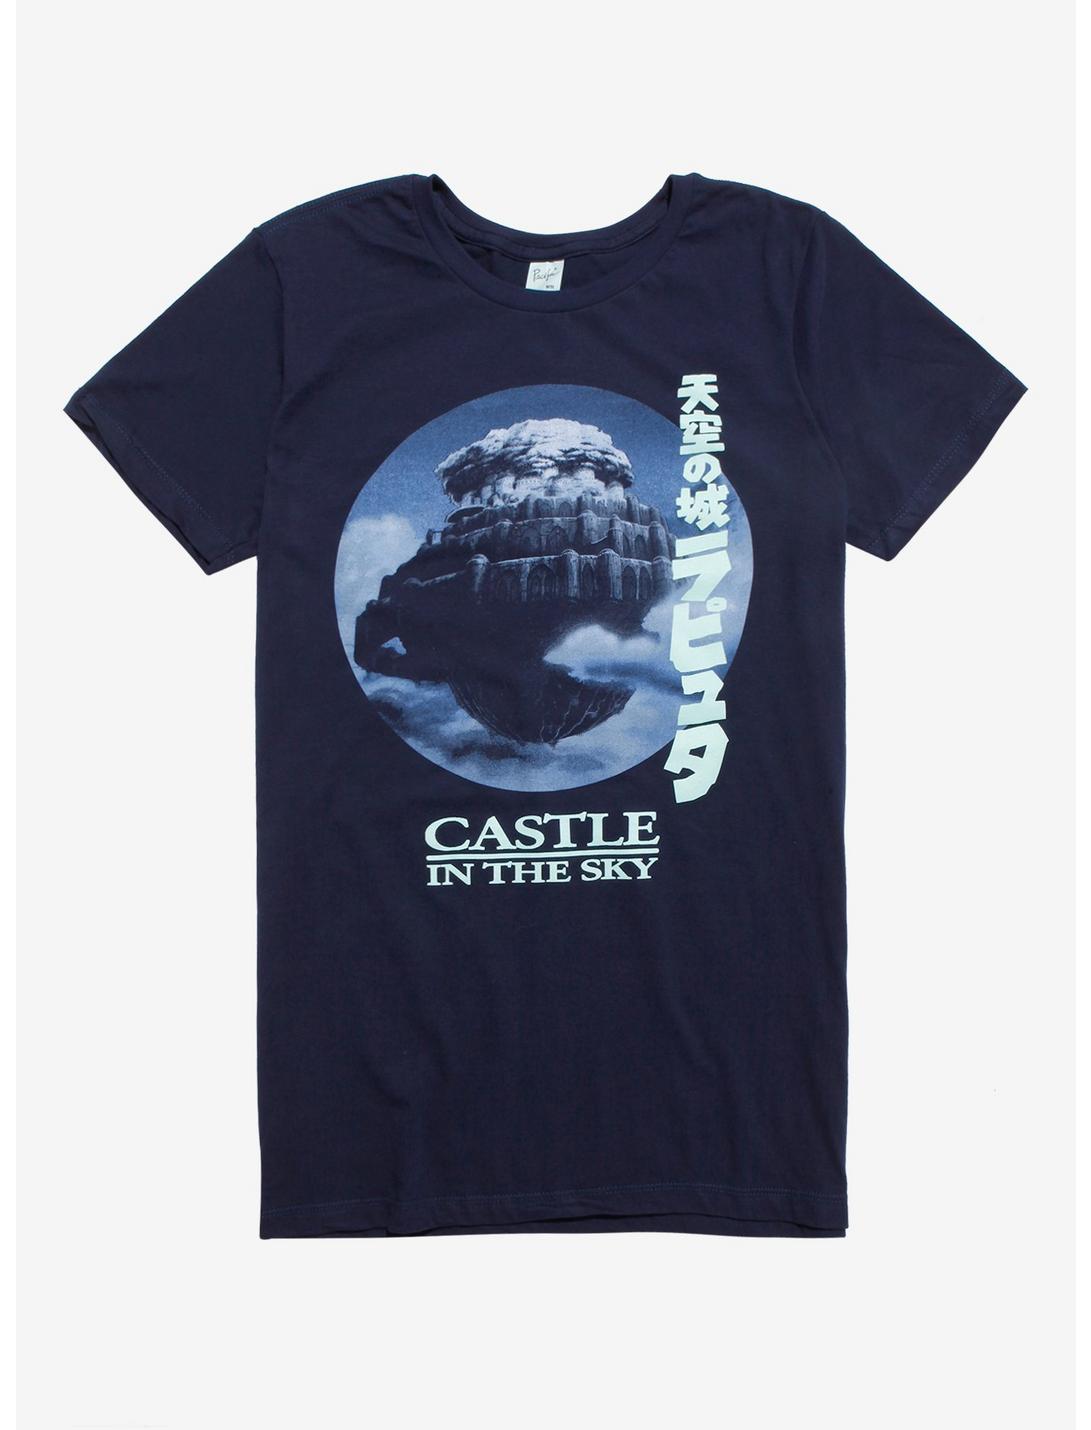 Studio Ghibli Castle In The Sky Round Frame T-Shirt, NAVY, hi-res